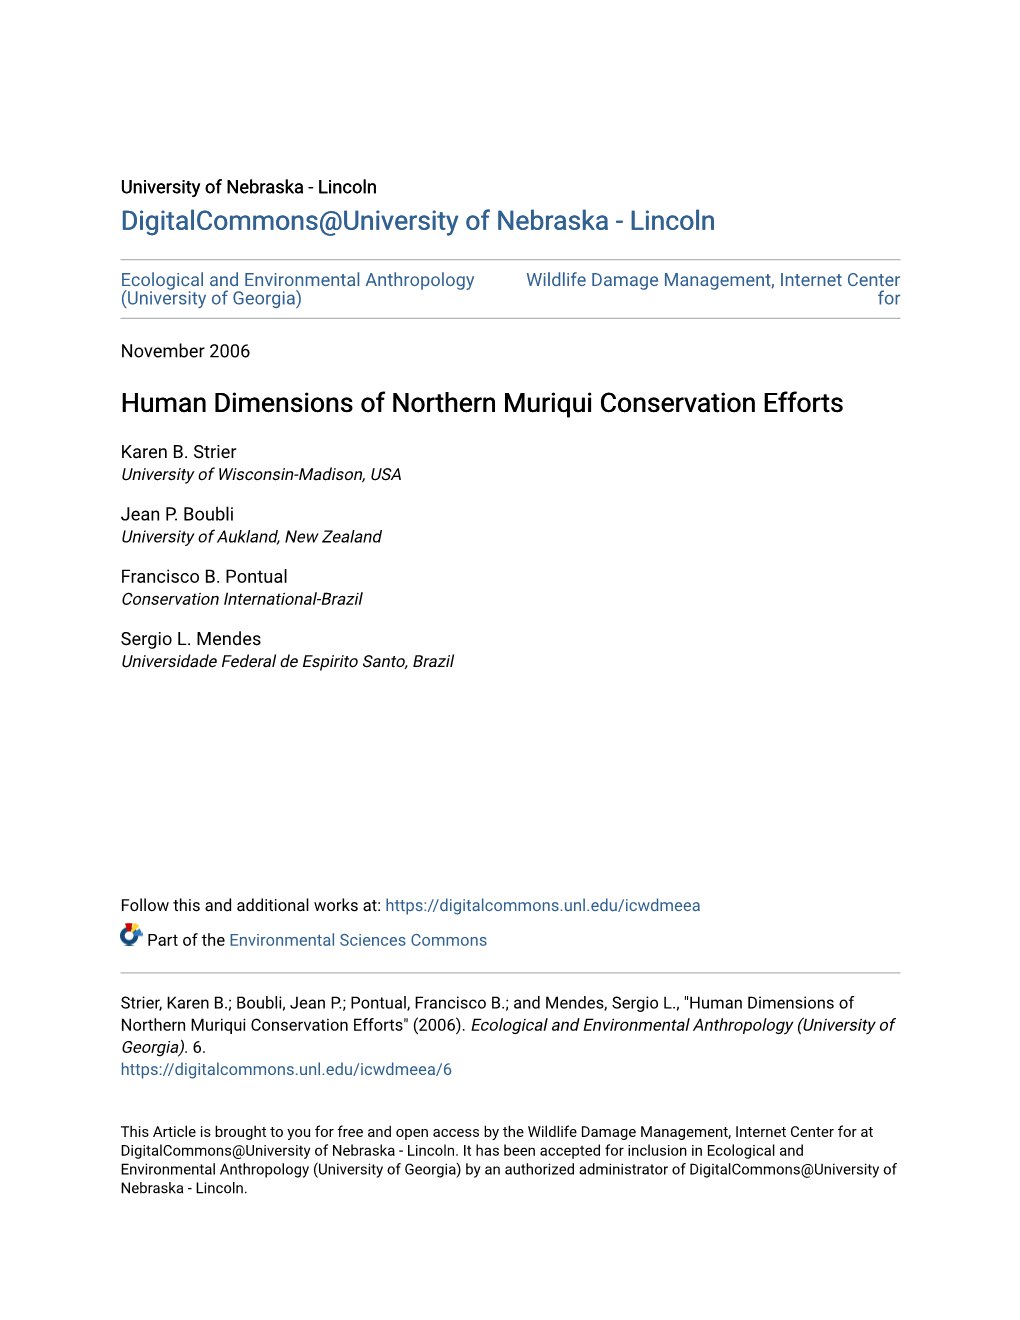 Human Dimensions of Northern Muriqui Conservation Efforts